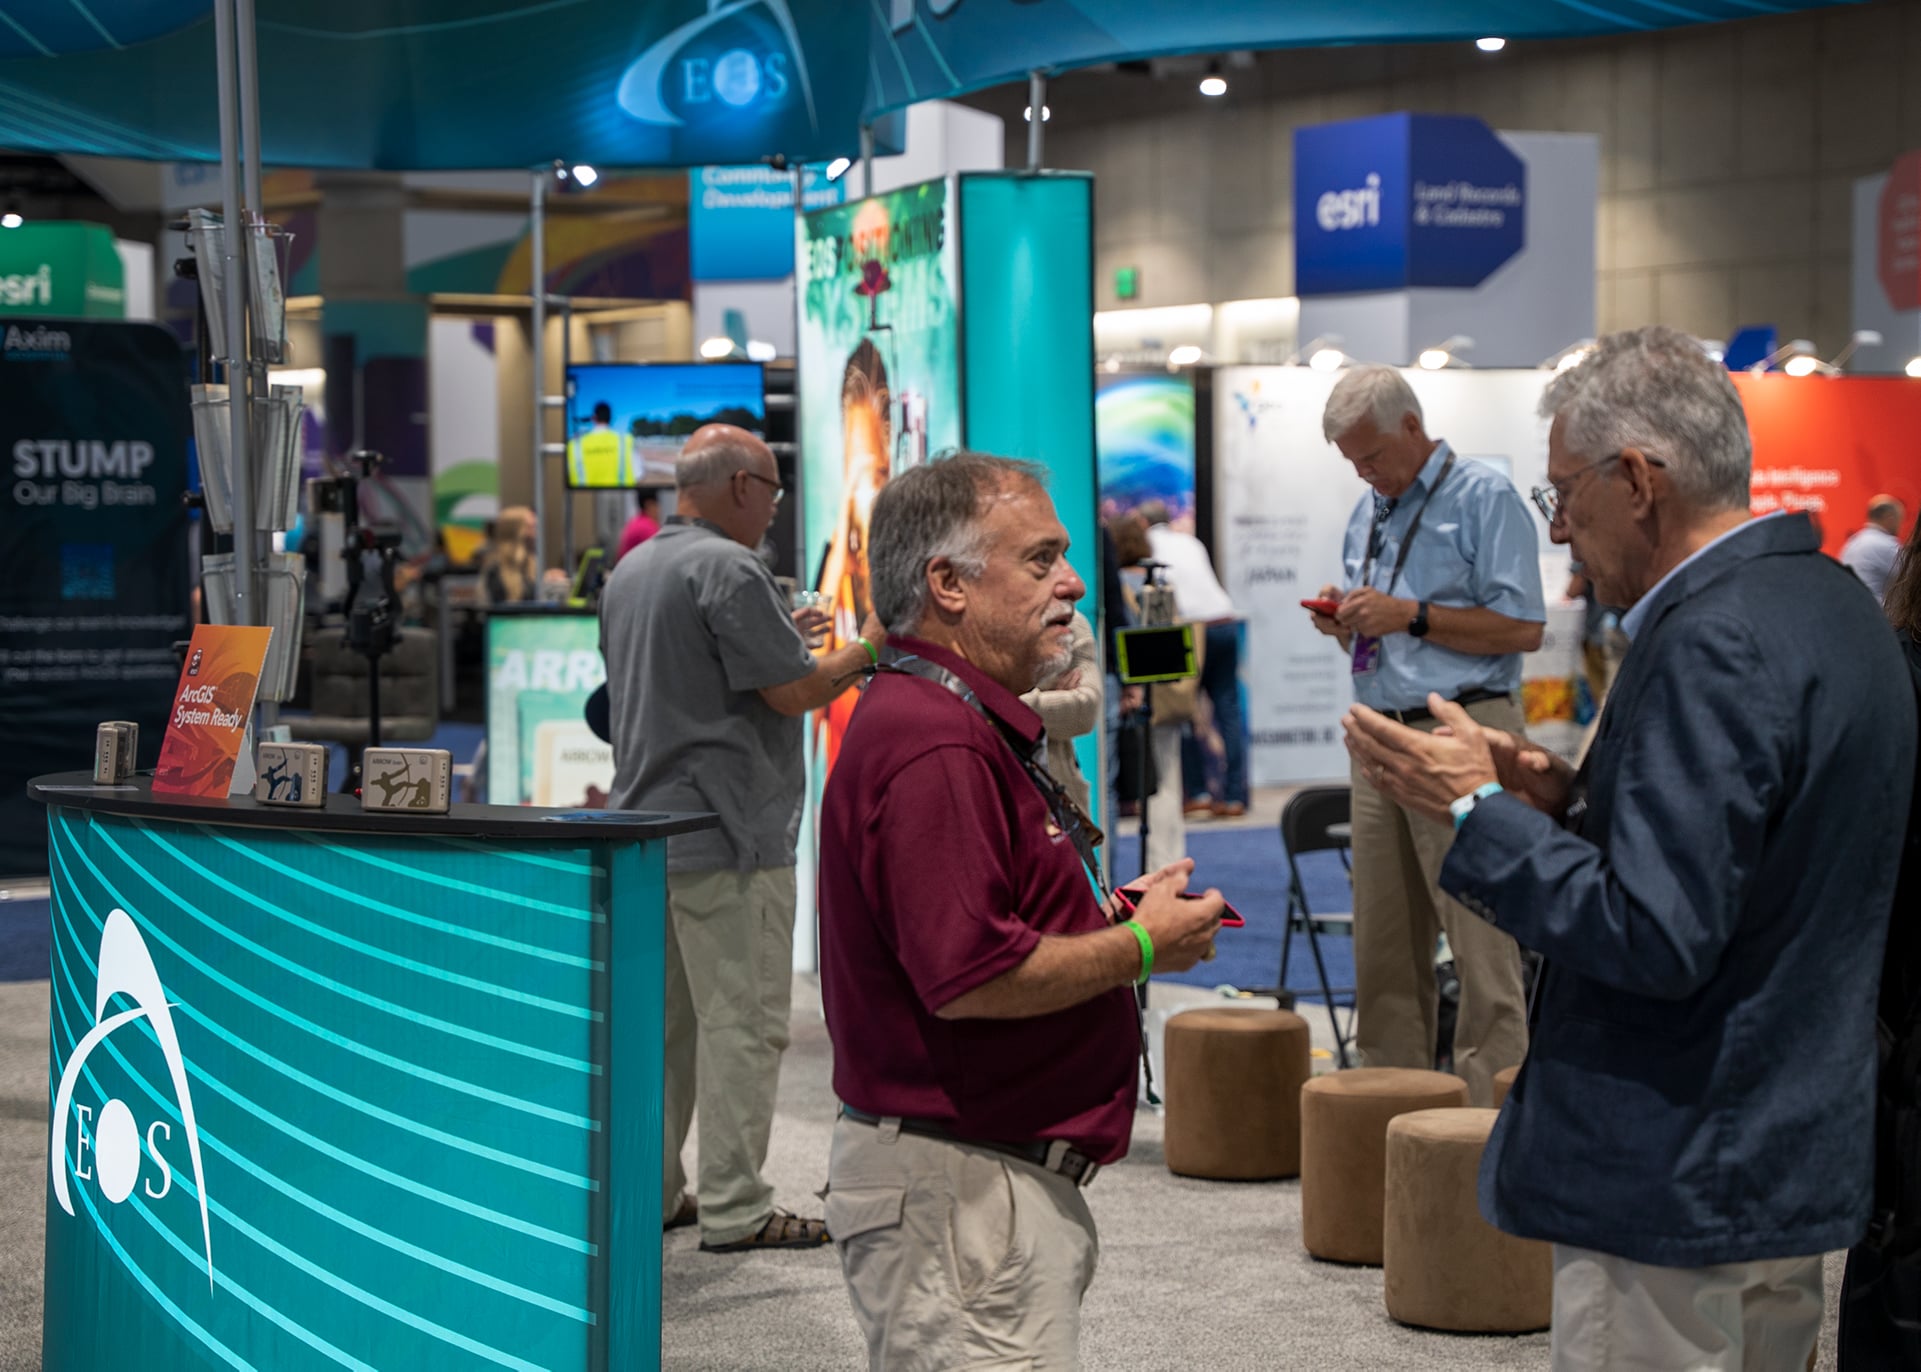 David Pritchard speaks to a customer at the Eos Esri UC booth